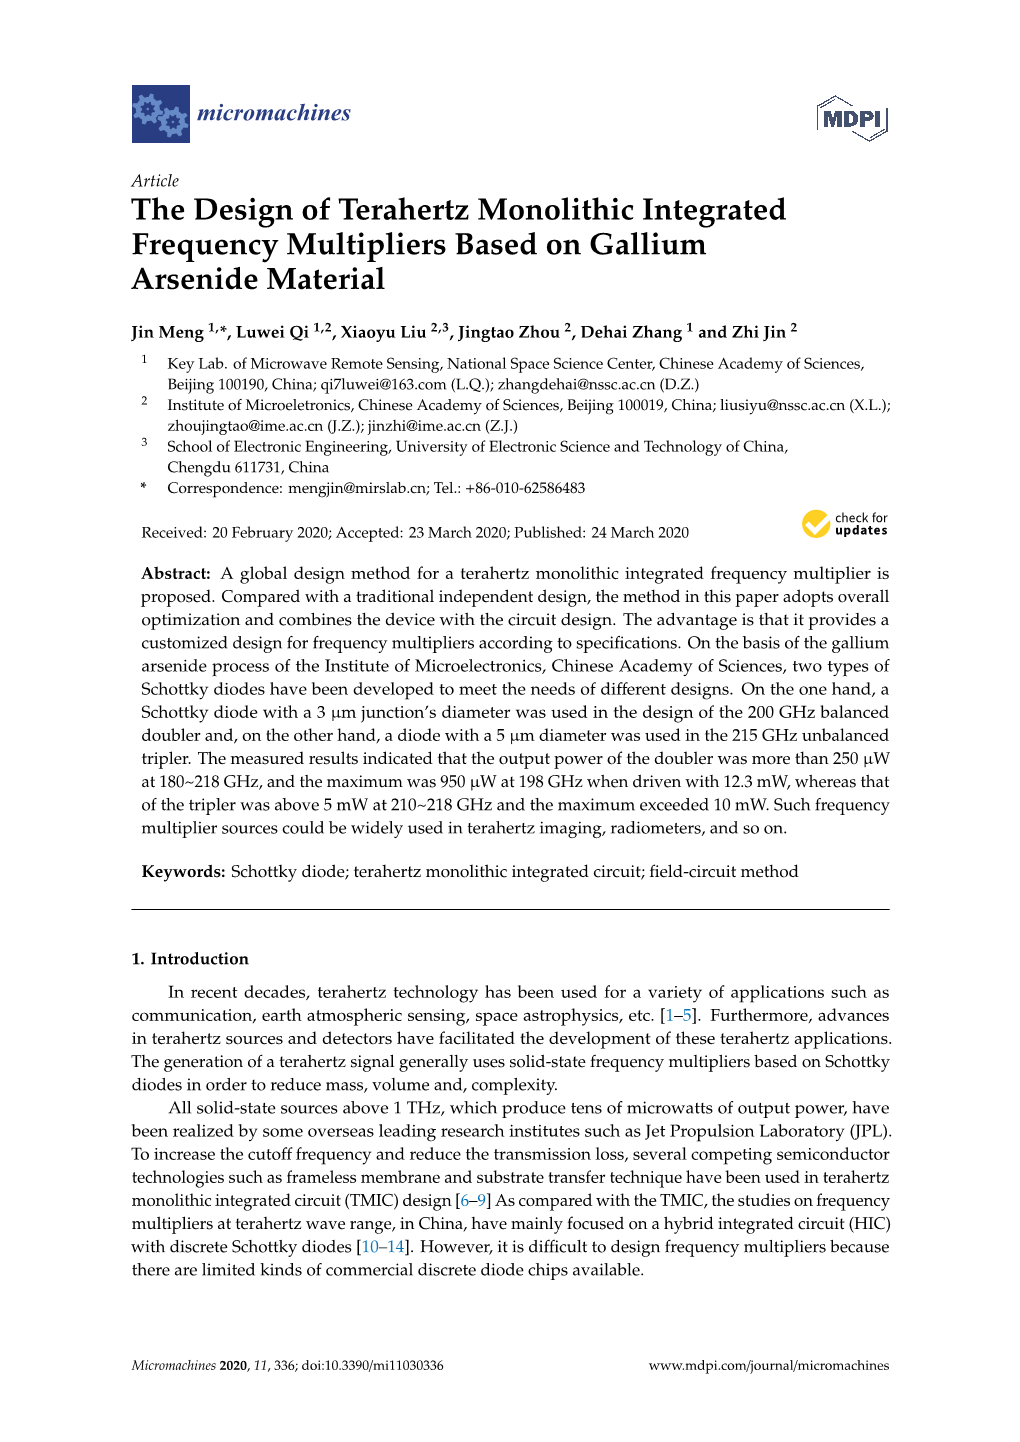 The Design of Terahertz Monolithic Integrated Frequency Multipliers Based on Gallium Arsenide Material